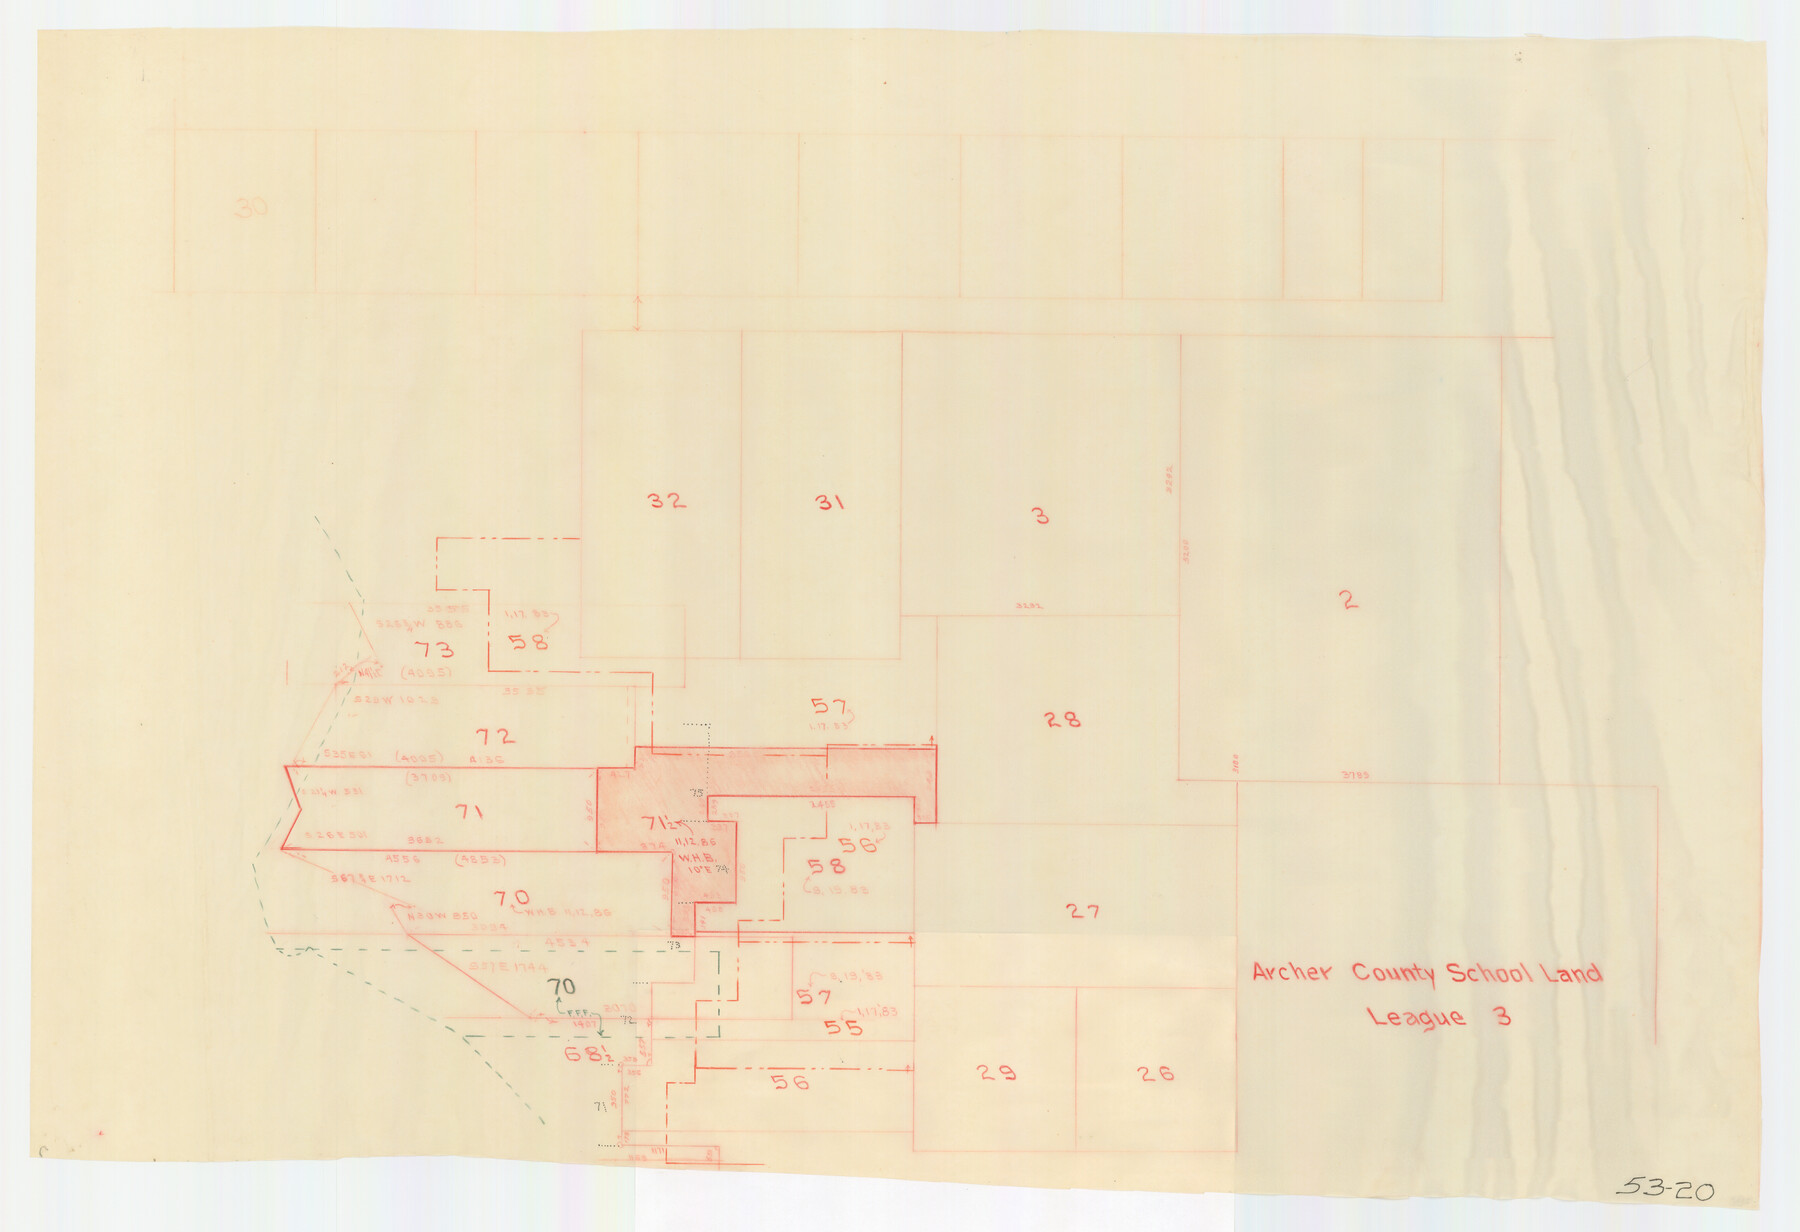 90471, [Part of Block GG and river sections 68 1/2 -73], Twichell Survey Records